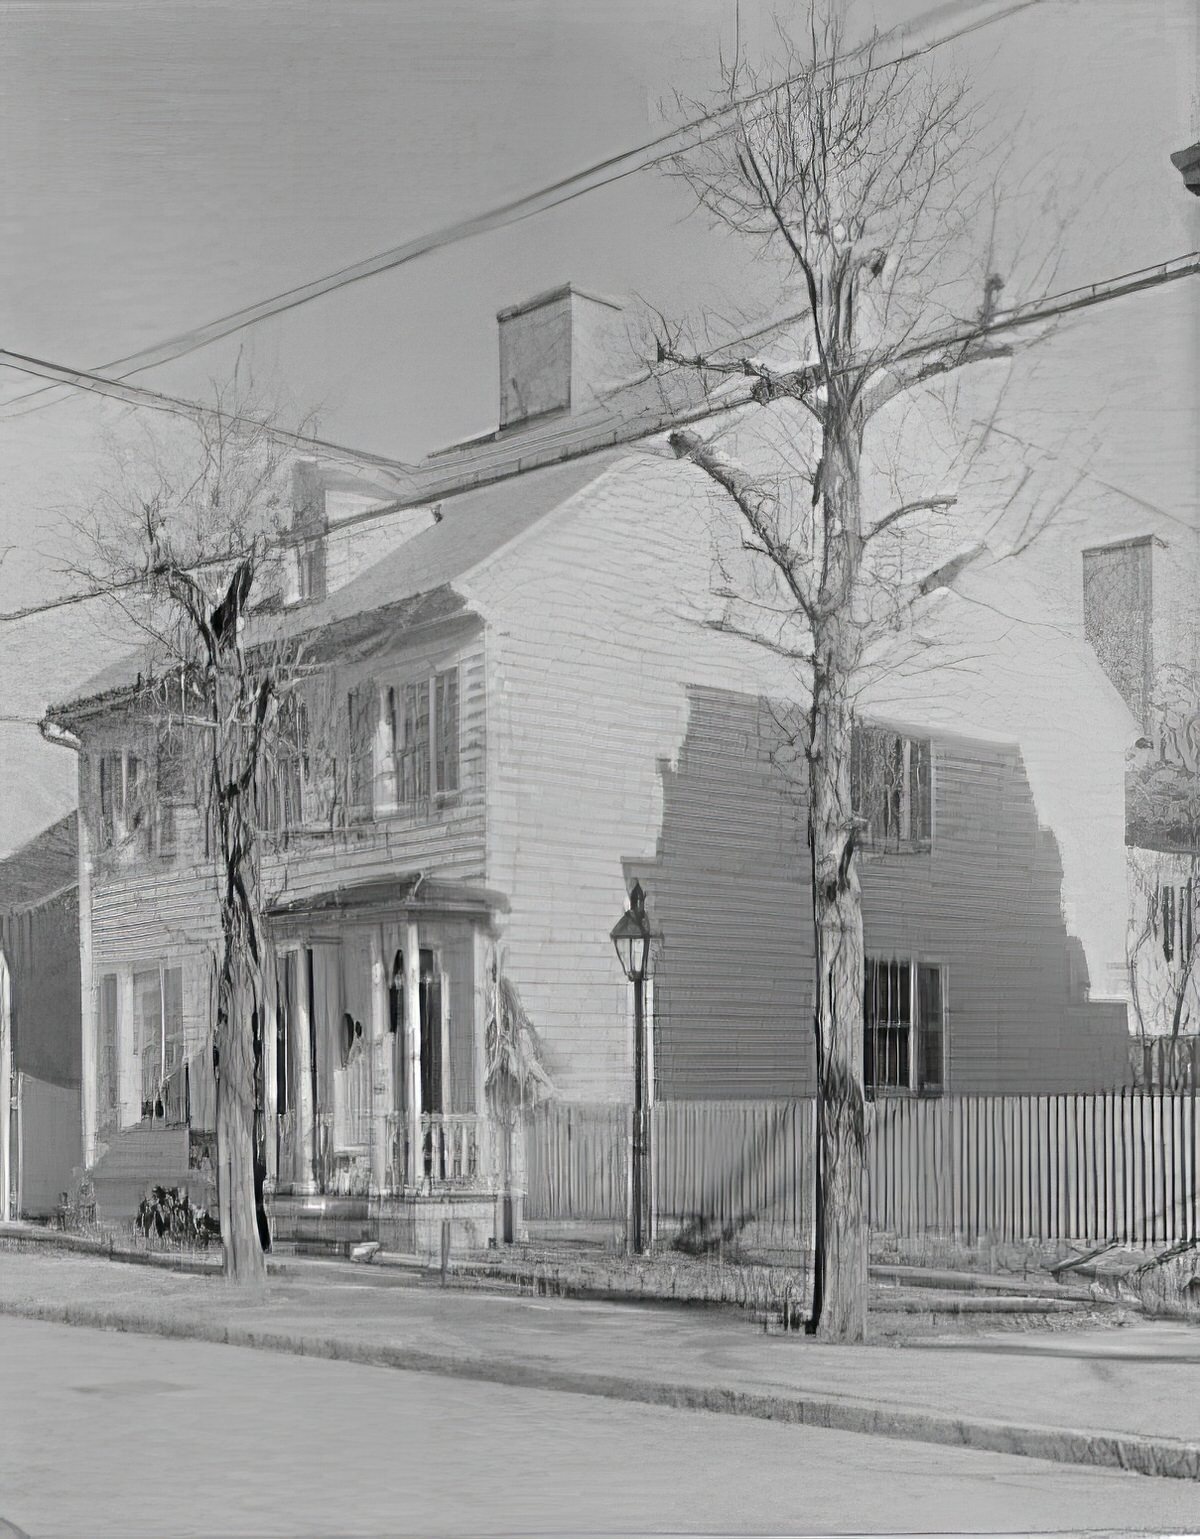 Dr. William Brown's house in Alexandria, 1920